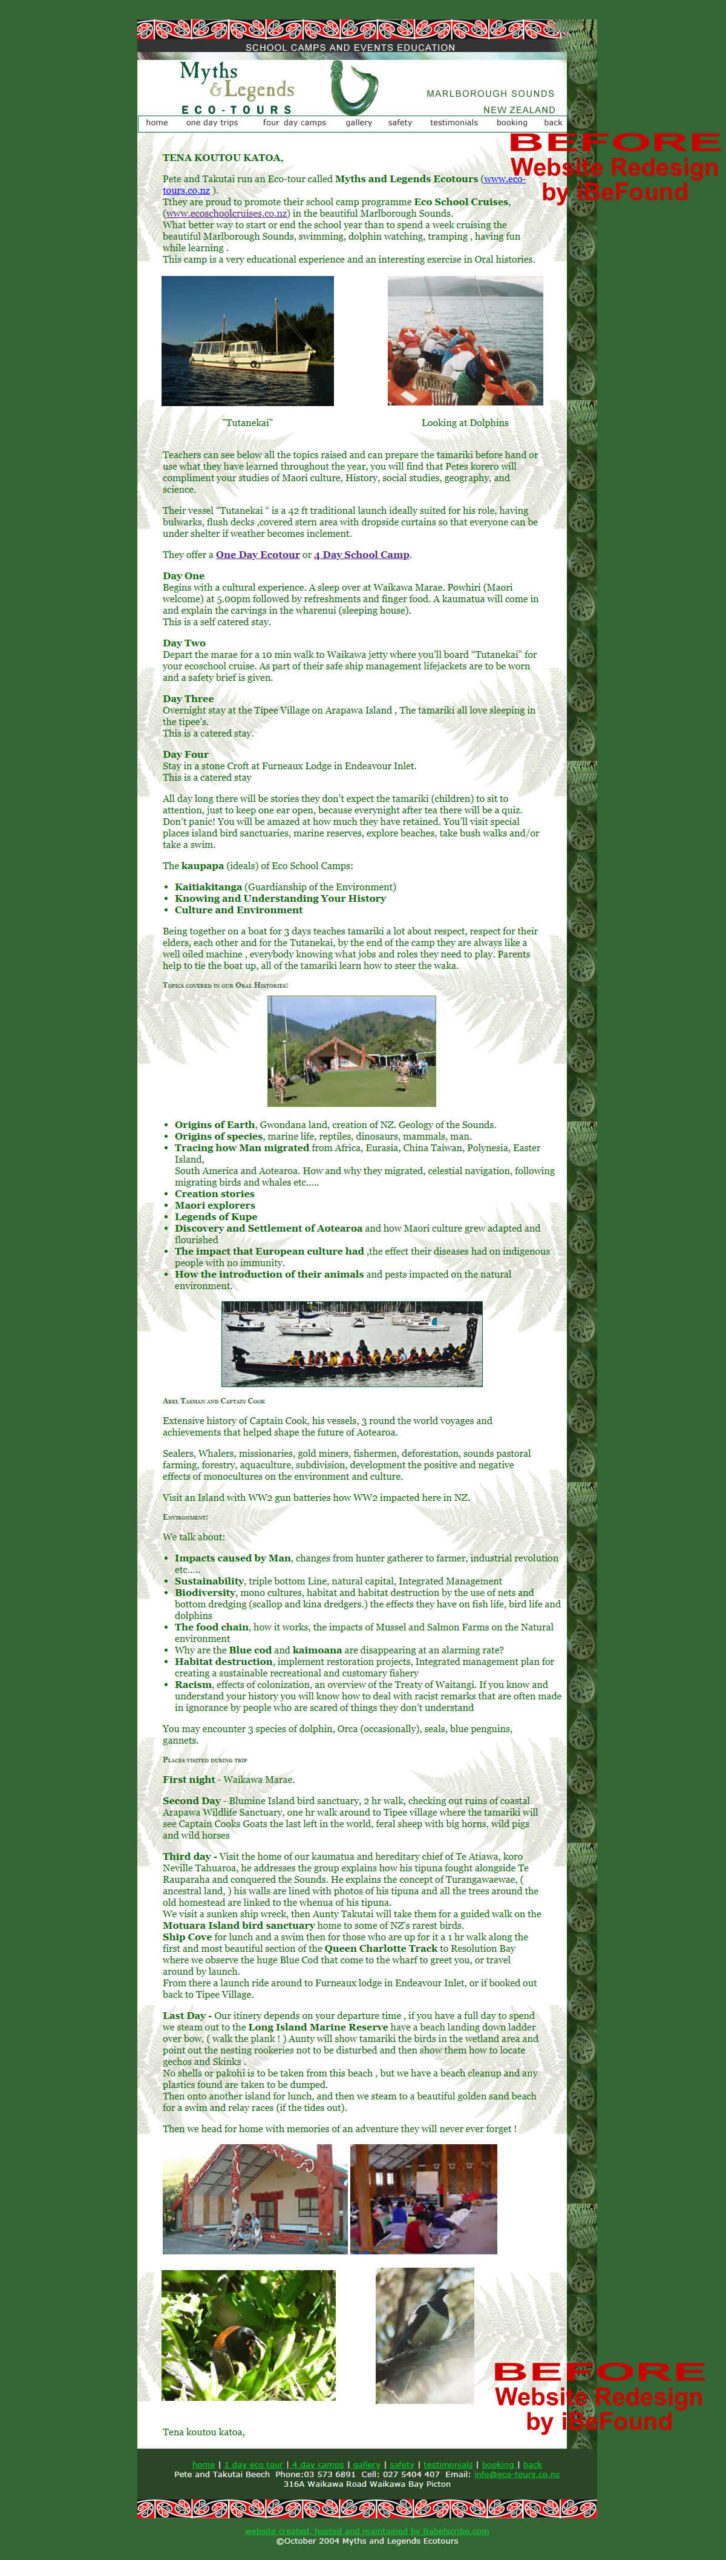 Homepage Of Maori Eco School Cruises Before Website Redesign By IBeFound Digital Marketing Division